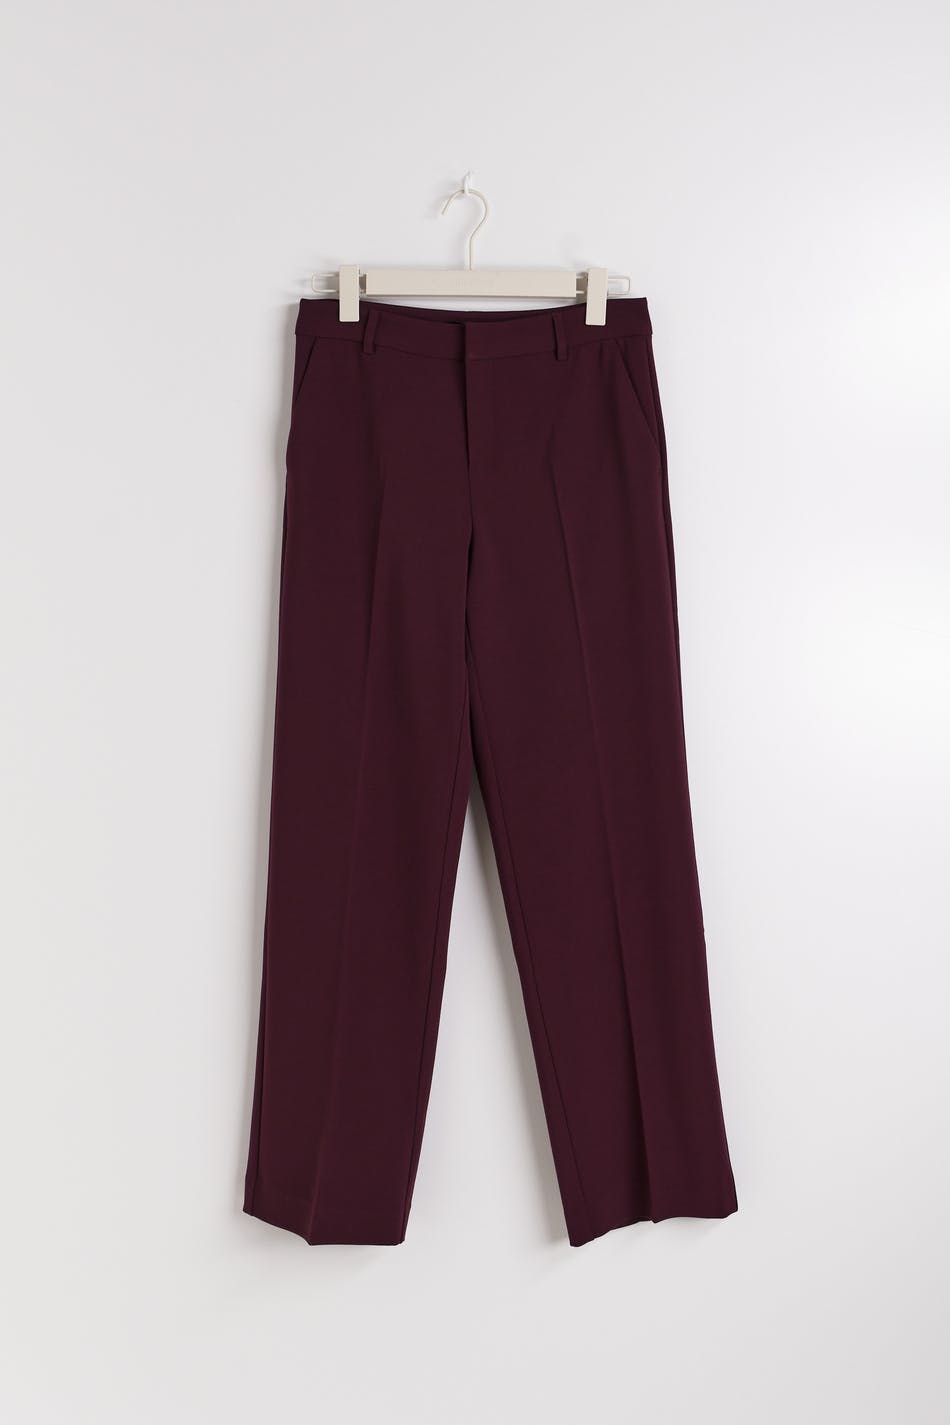 Gina Tricot - Straight tall trousers - byxor - Red - 34 - Female